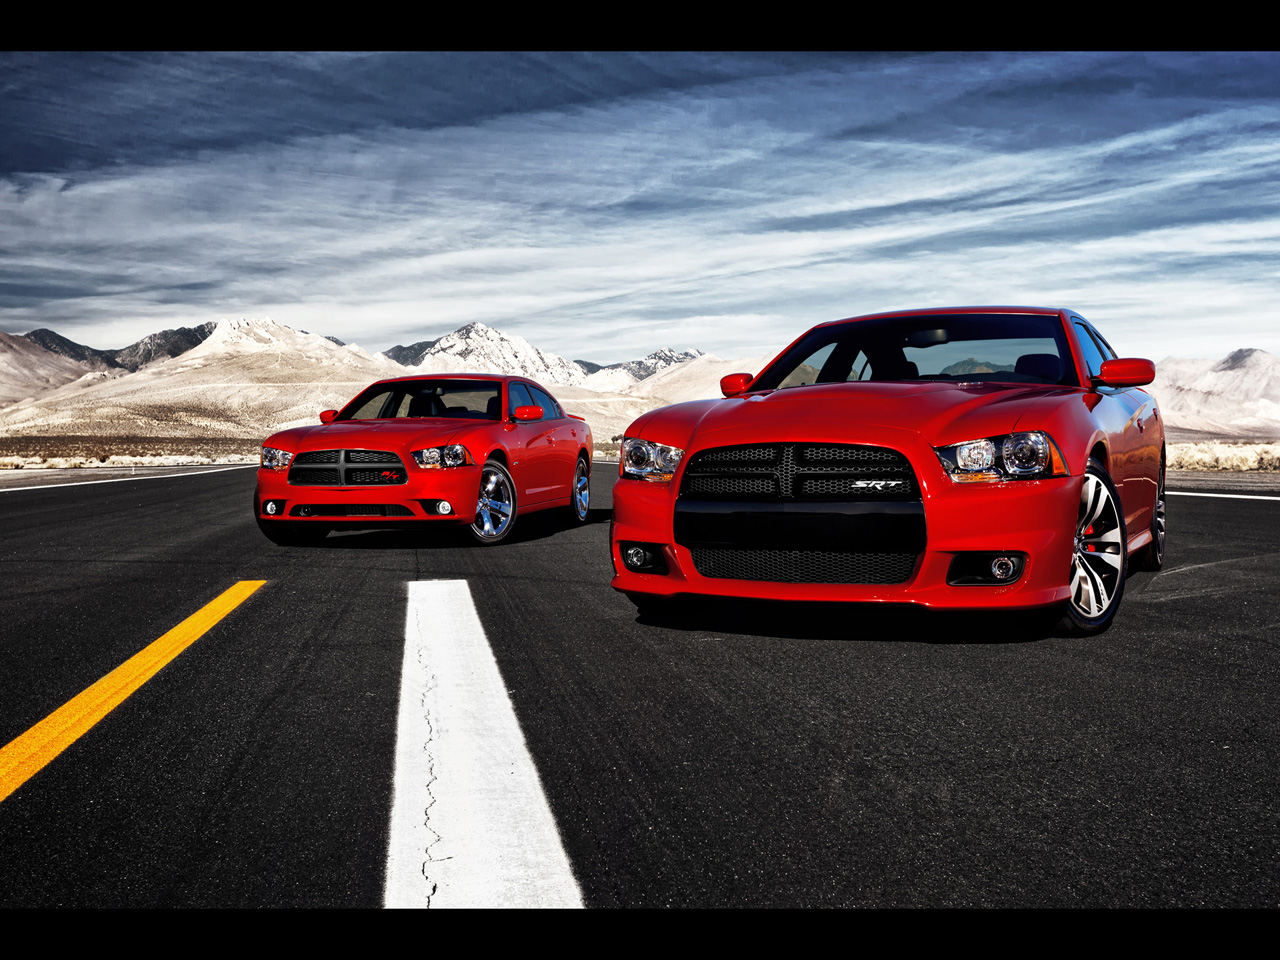 HD Wallpapers: 2012 Dodge Charger RT Wallpapers